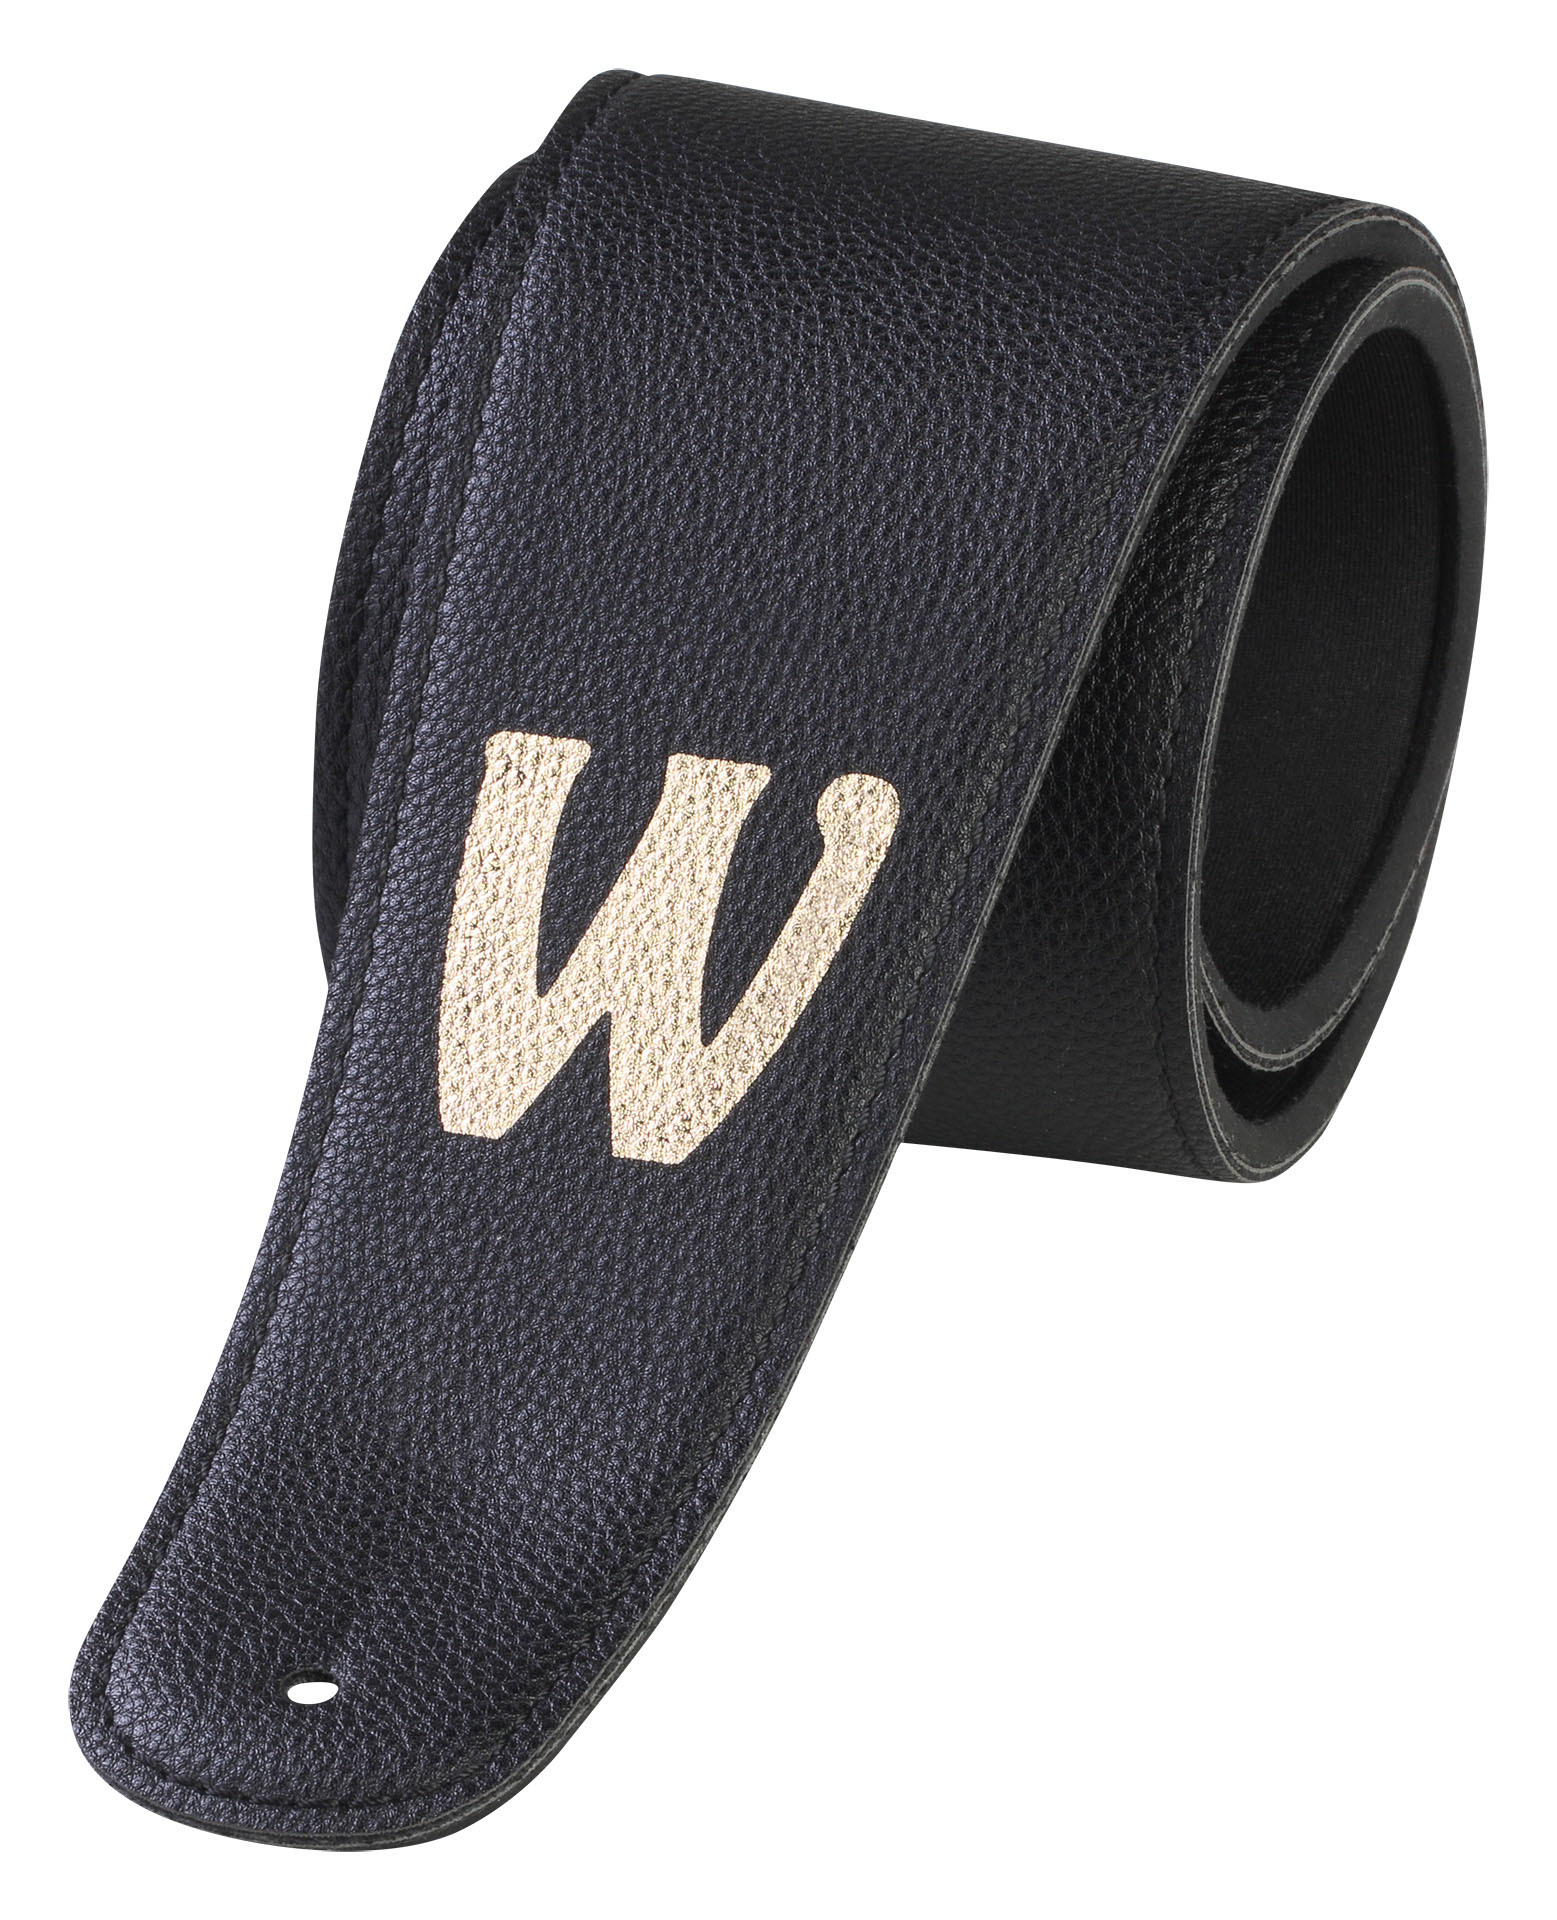 Warwick Synthetic Leather Bass Strap with Neoprene Padding - Black, Gold Embossing